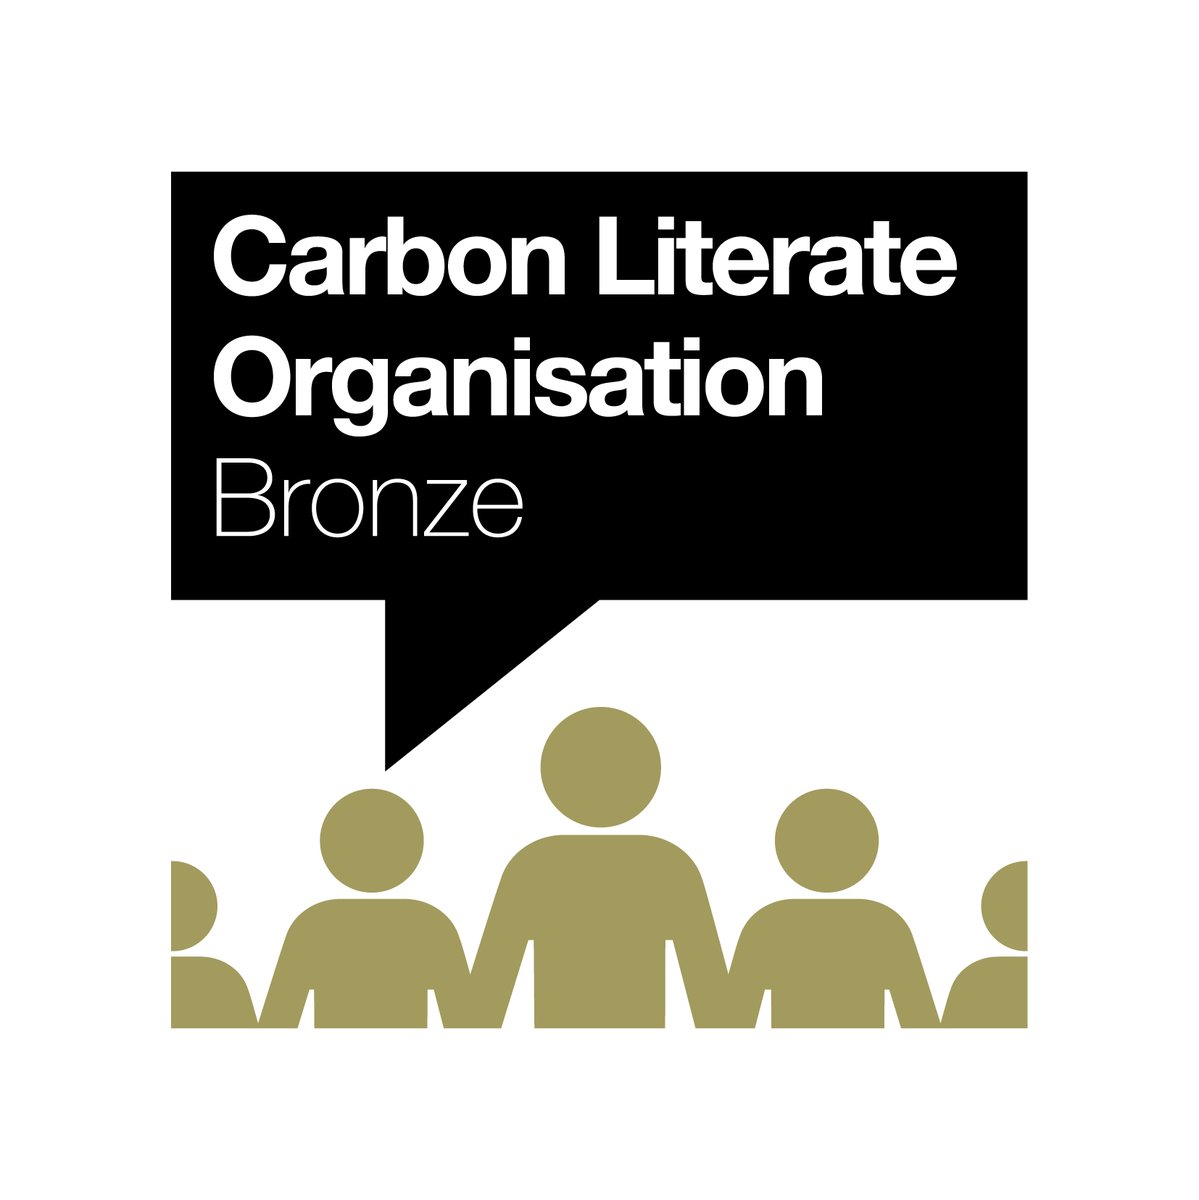 We are proud to announce that we have successfully been accredited as a Bronze Carbon Literate Organisation! Read the full release here: midsussex.gov.uk/about-us/press…